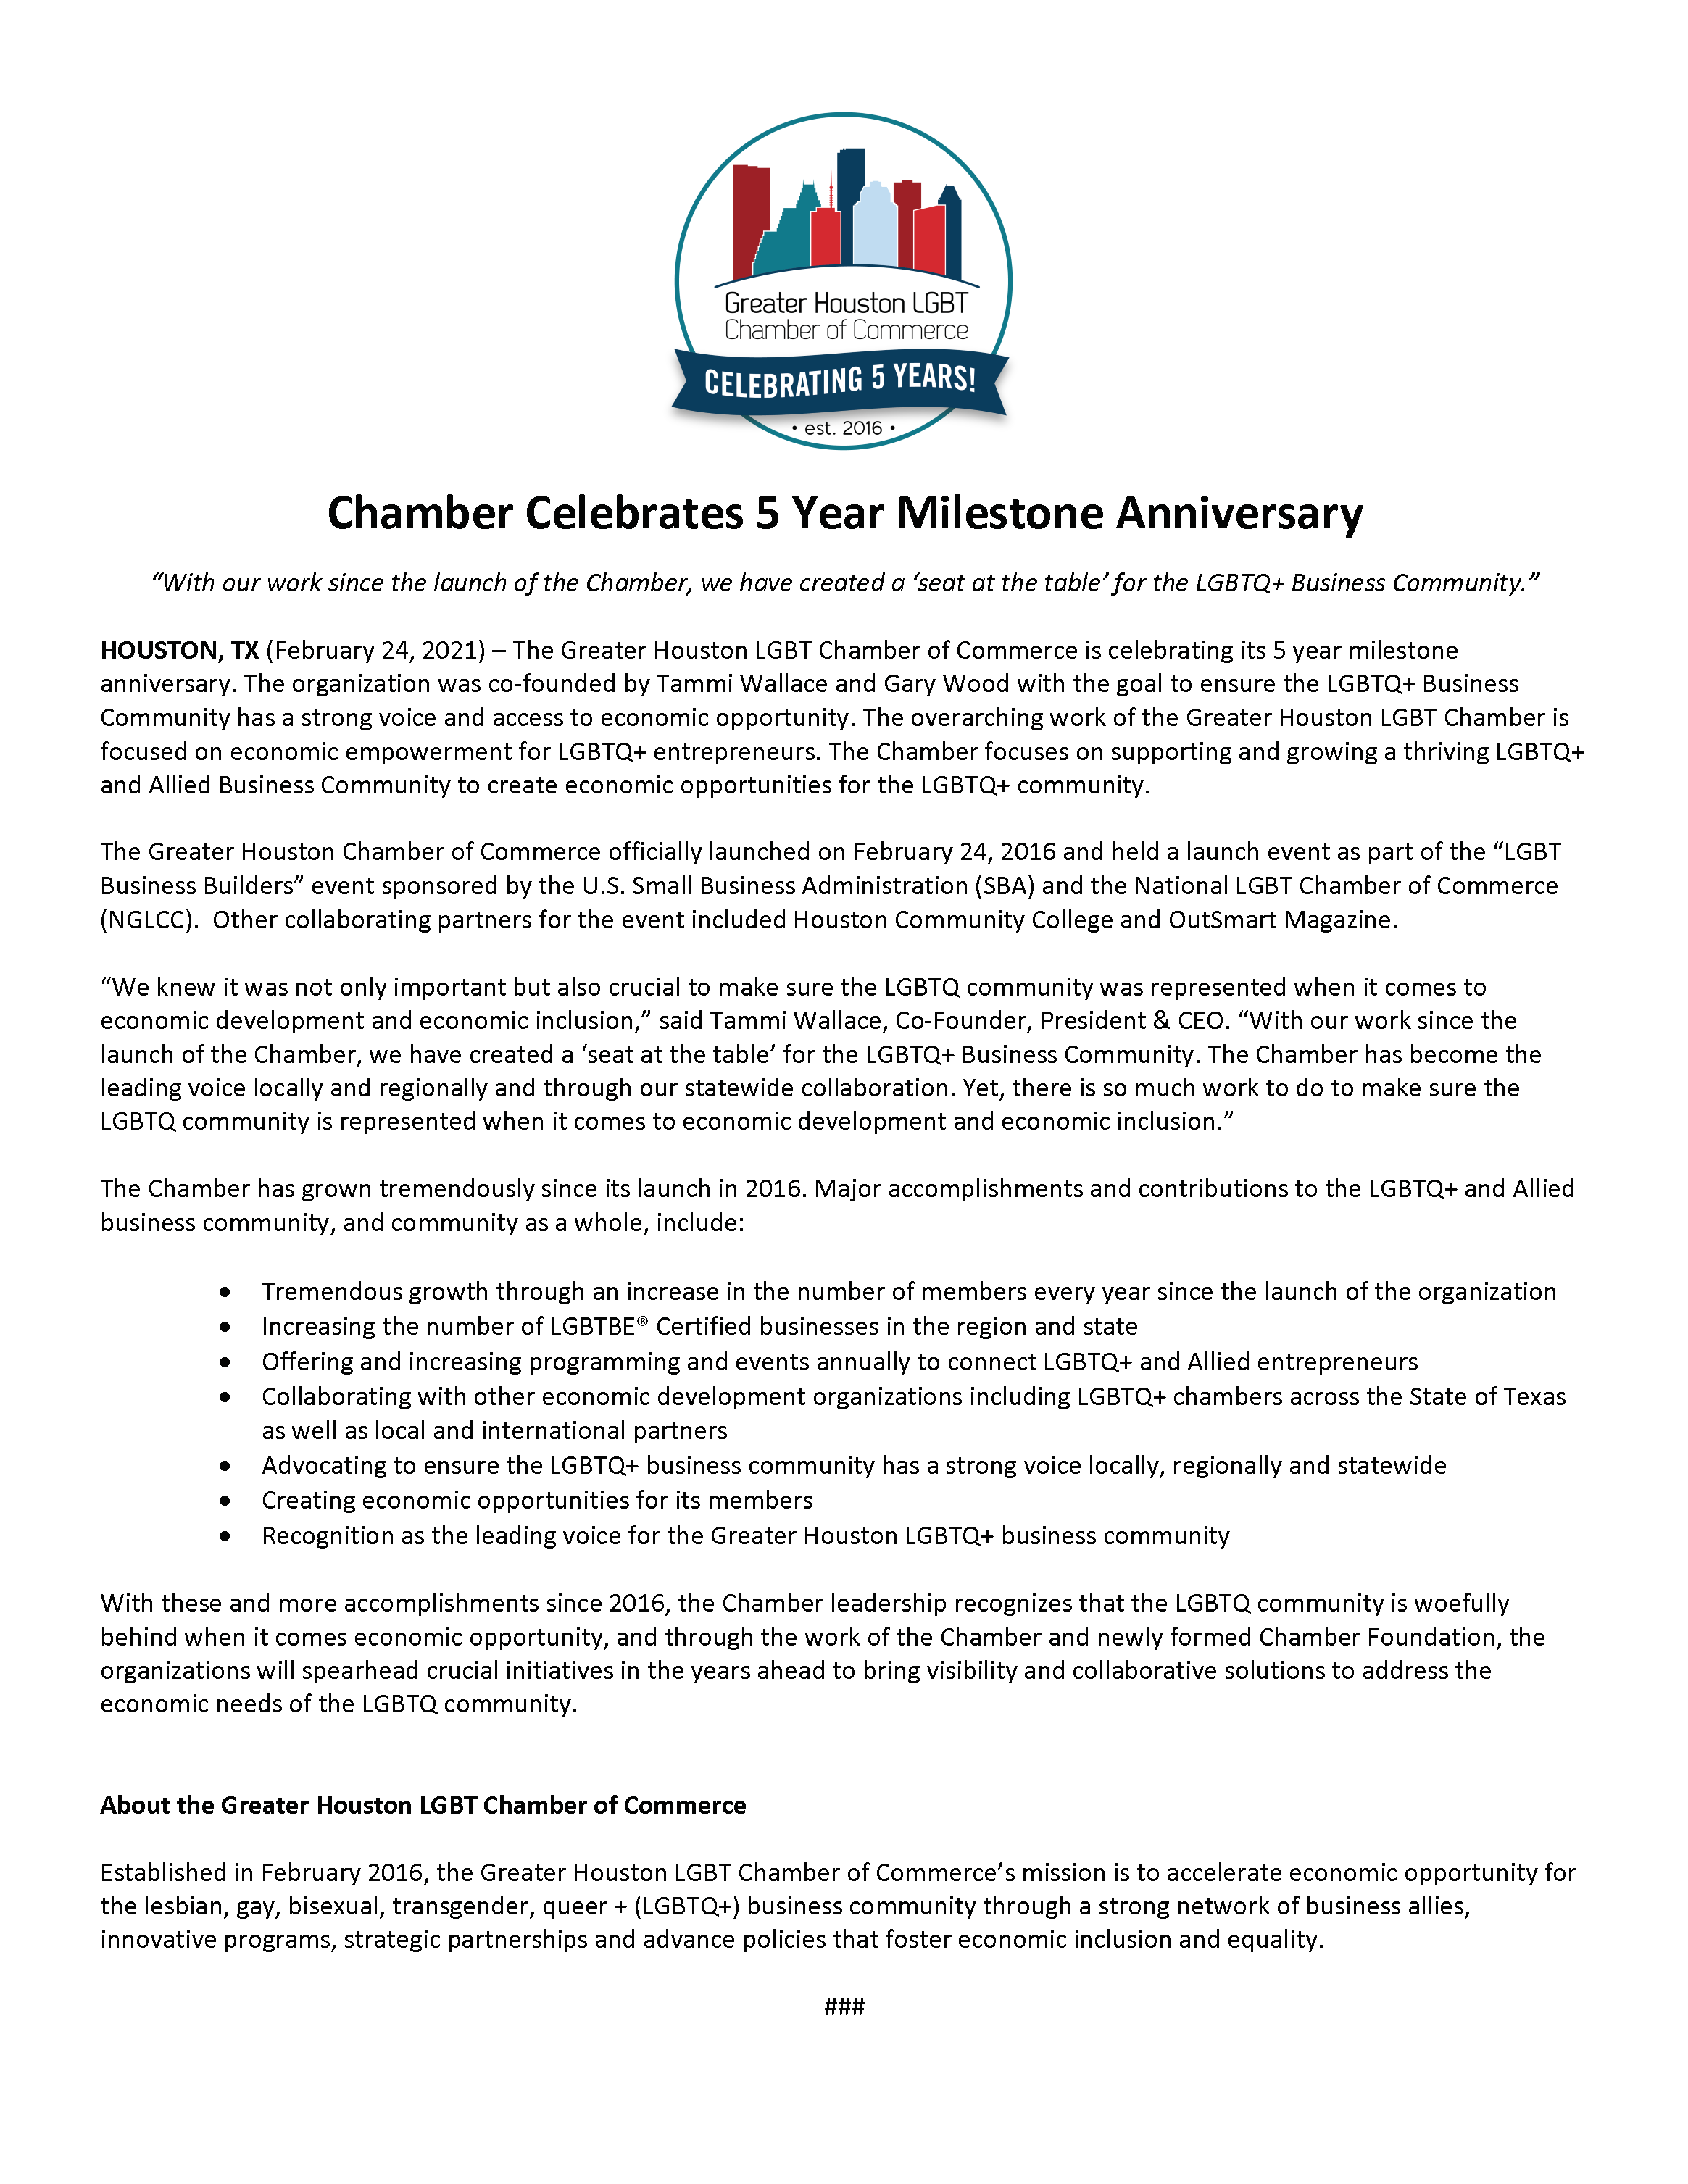 Greater Houston LGBT Chamber 5 Year Anniversary - Media Release ONE PAGE